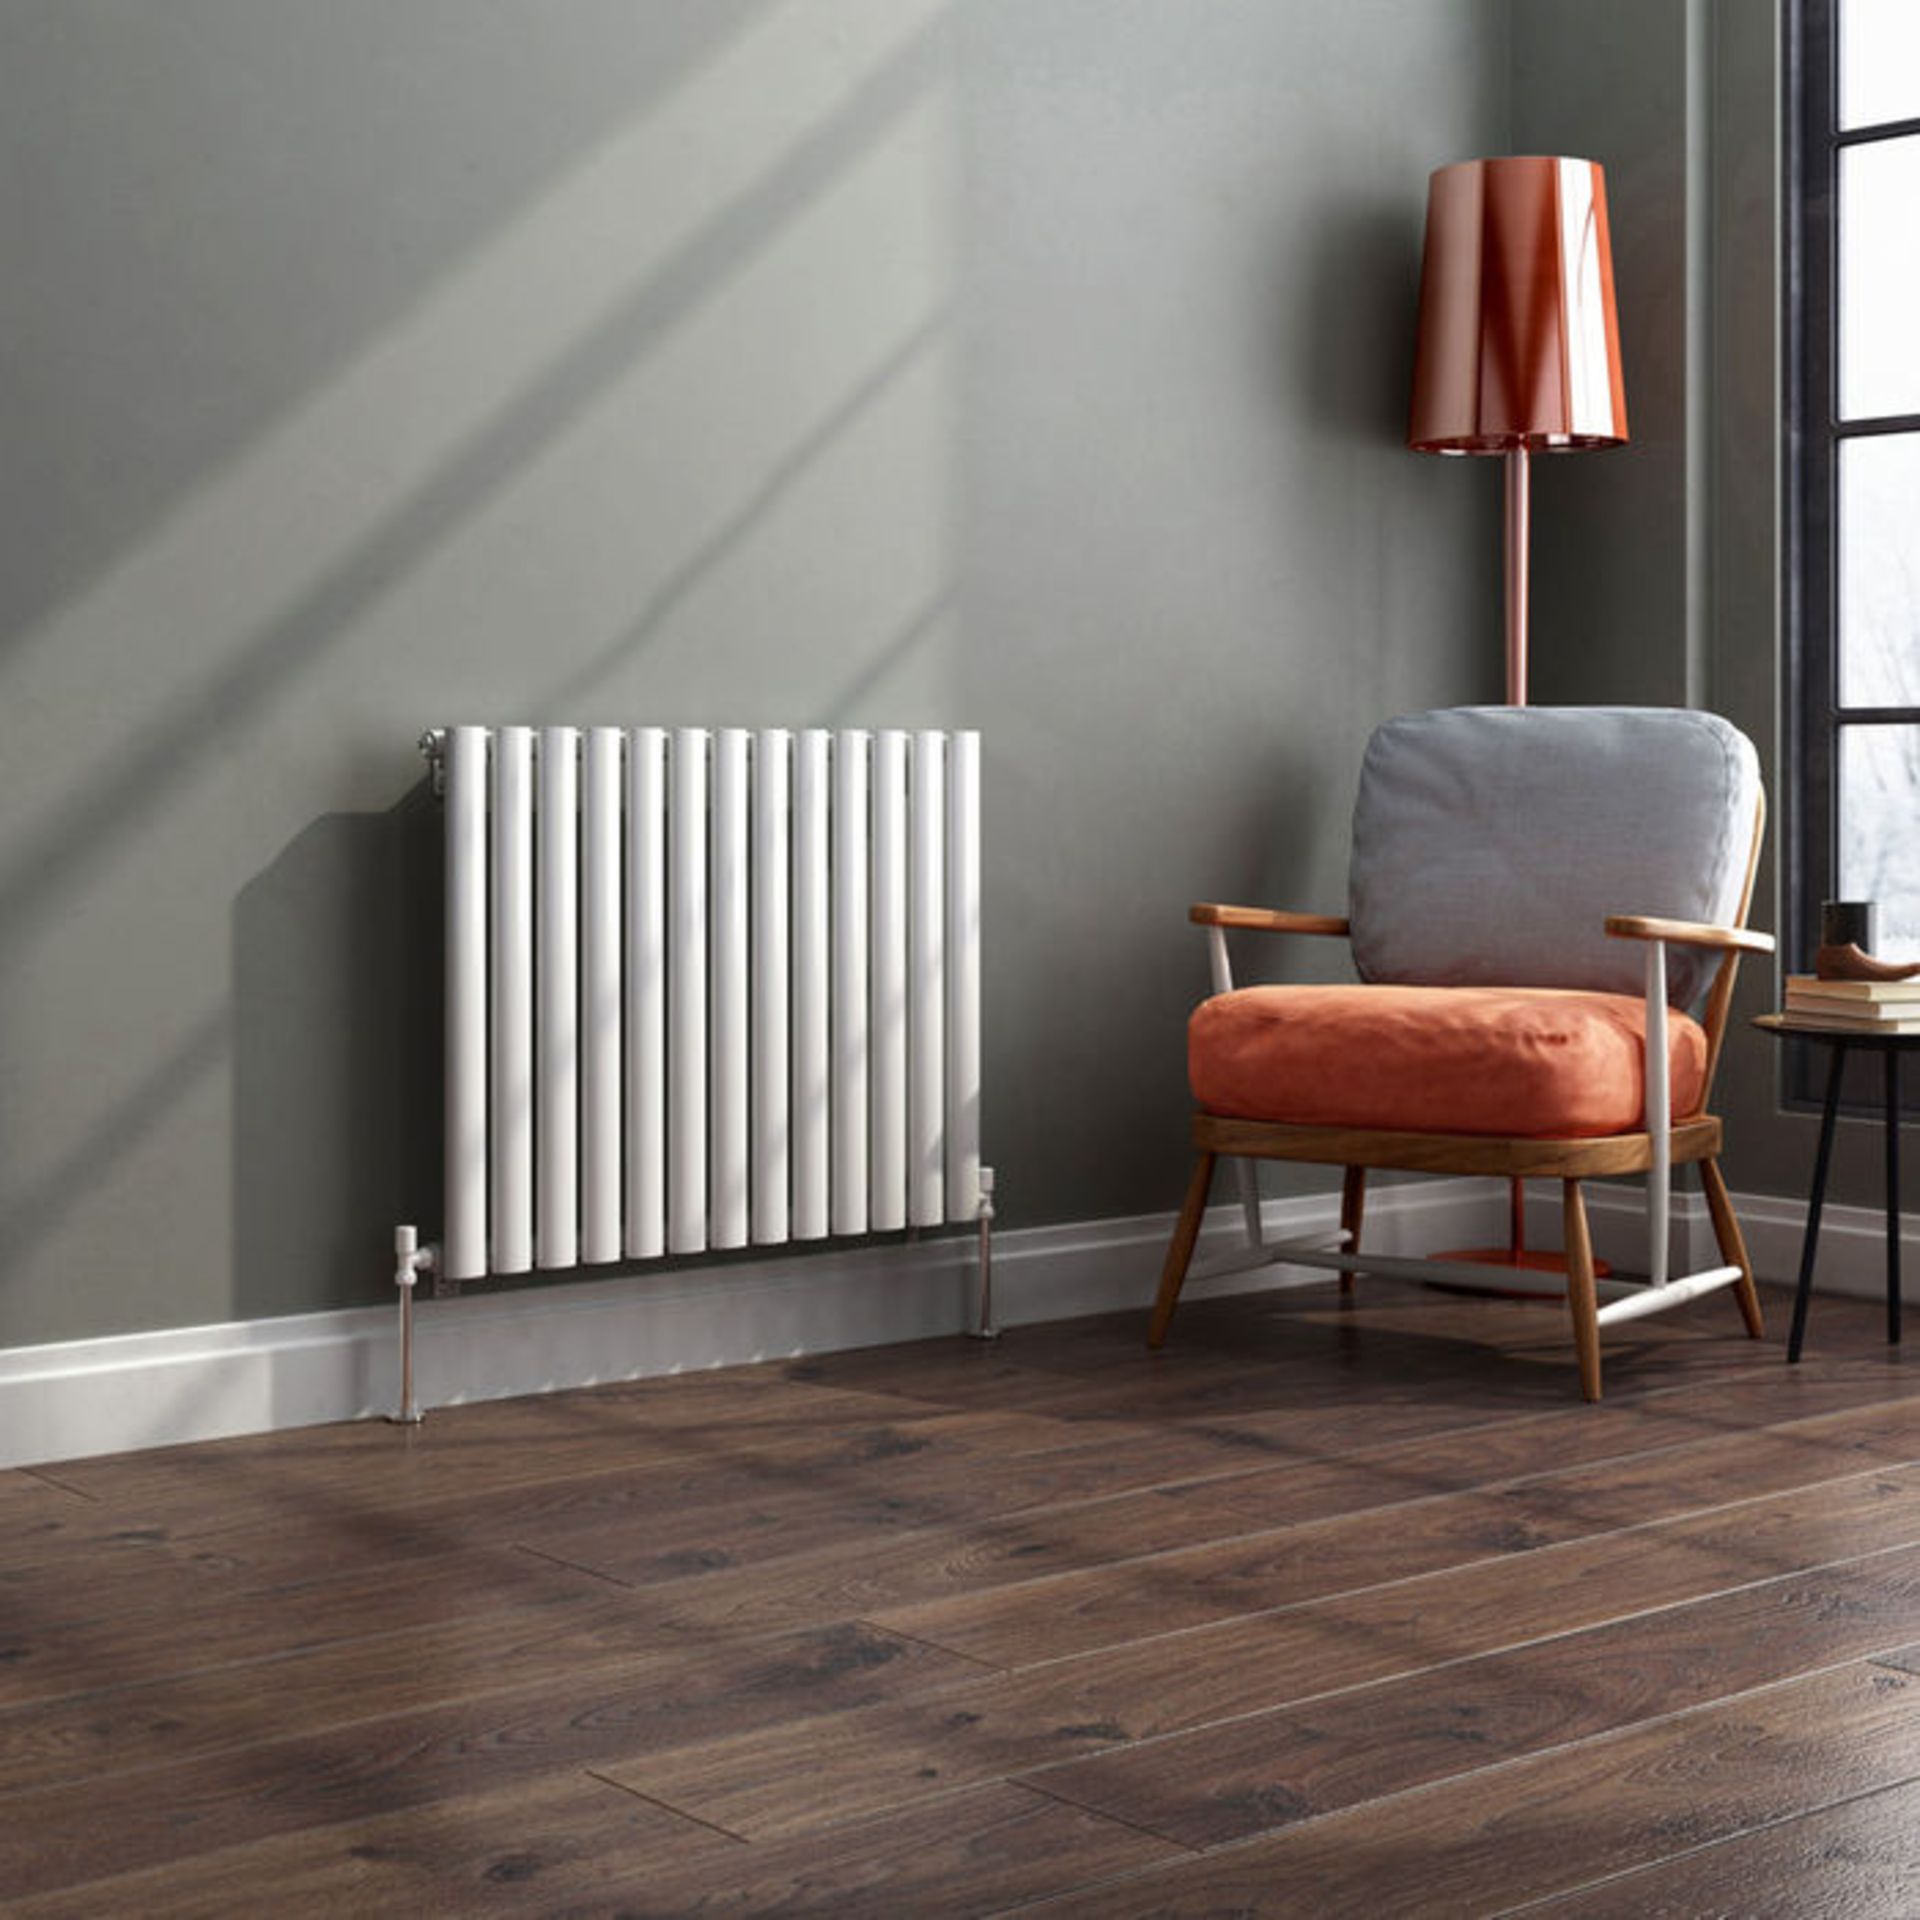 (H42) 600x780mm Gloss White Single Panel Oval Tube Horizontal Radiator RRP £267.99 Low carbon steel, - Image 2 of 3